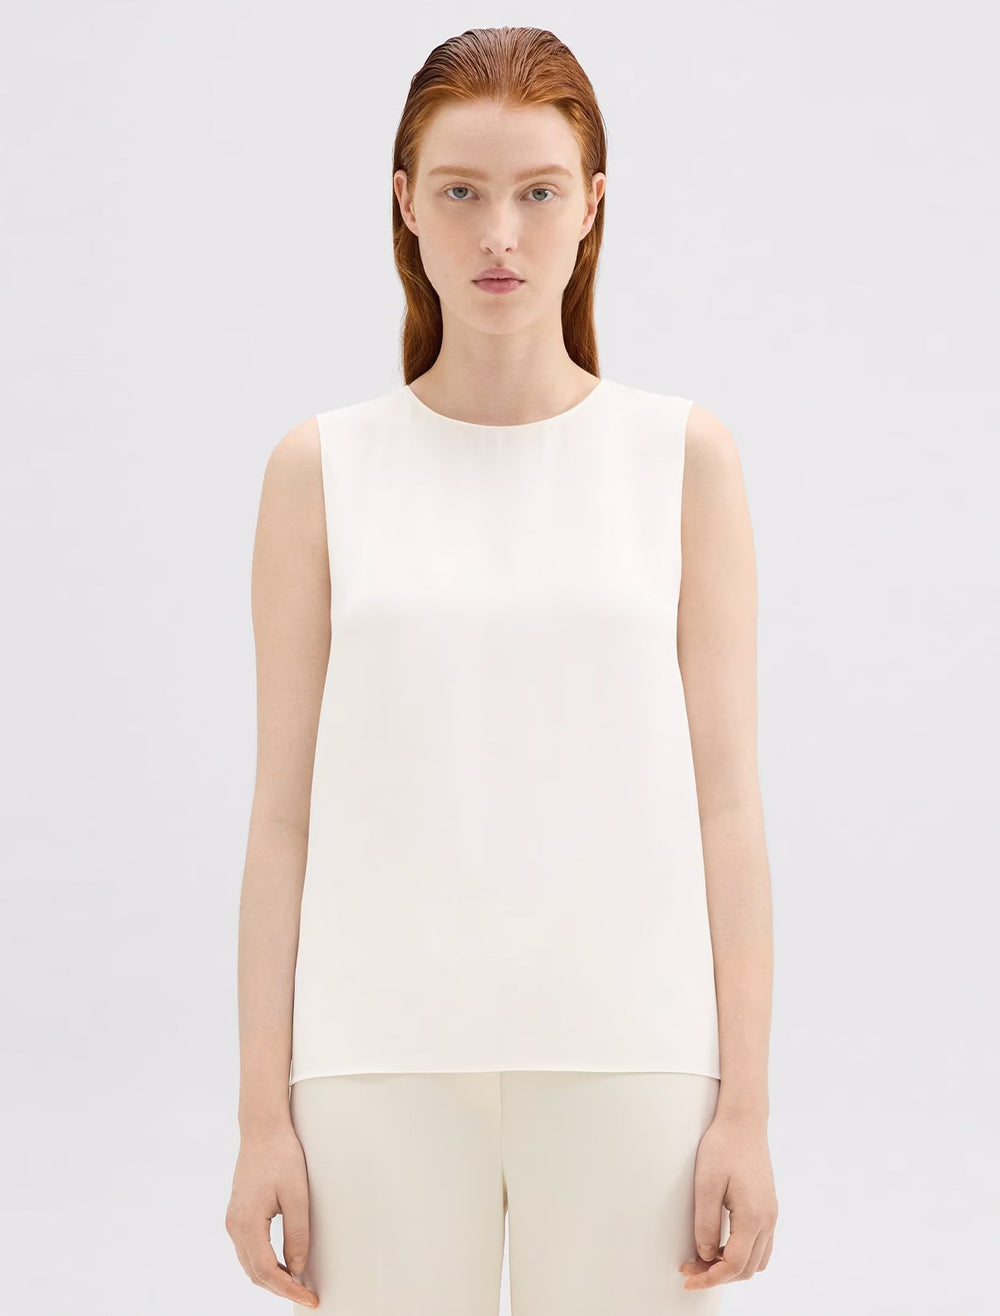 Model wearing Theory's the sleeveless shell in ivory.